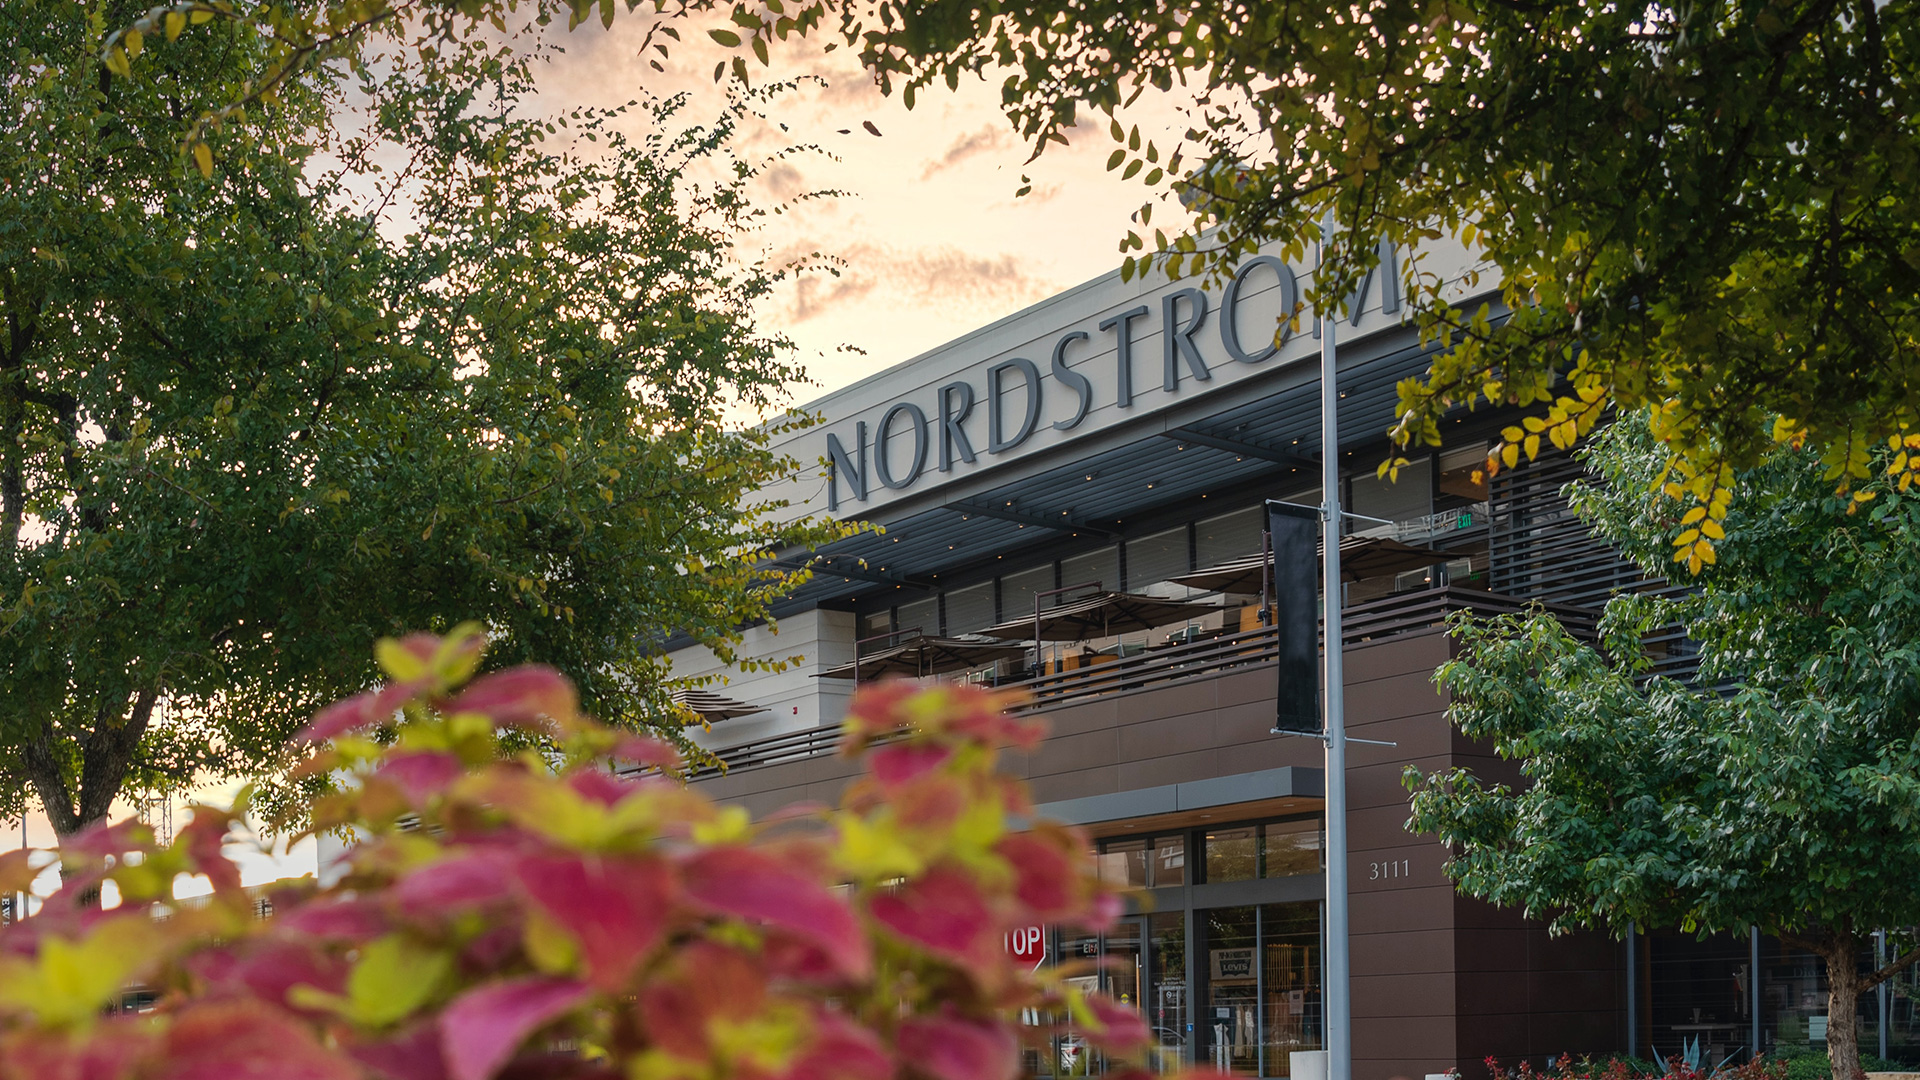 Nordstrom Credit Card Review: Is It Worth It?